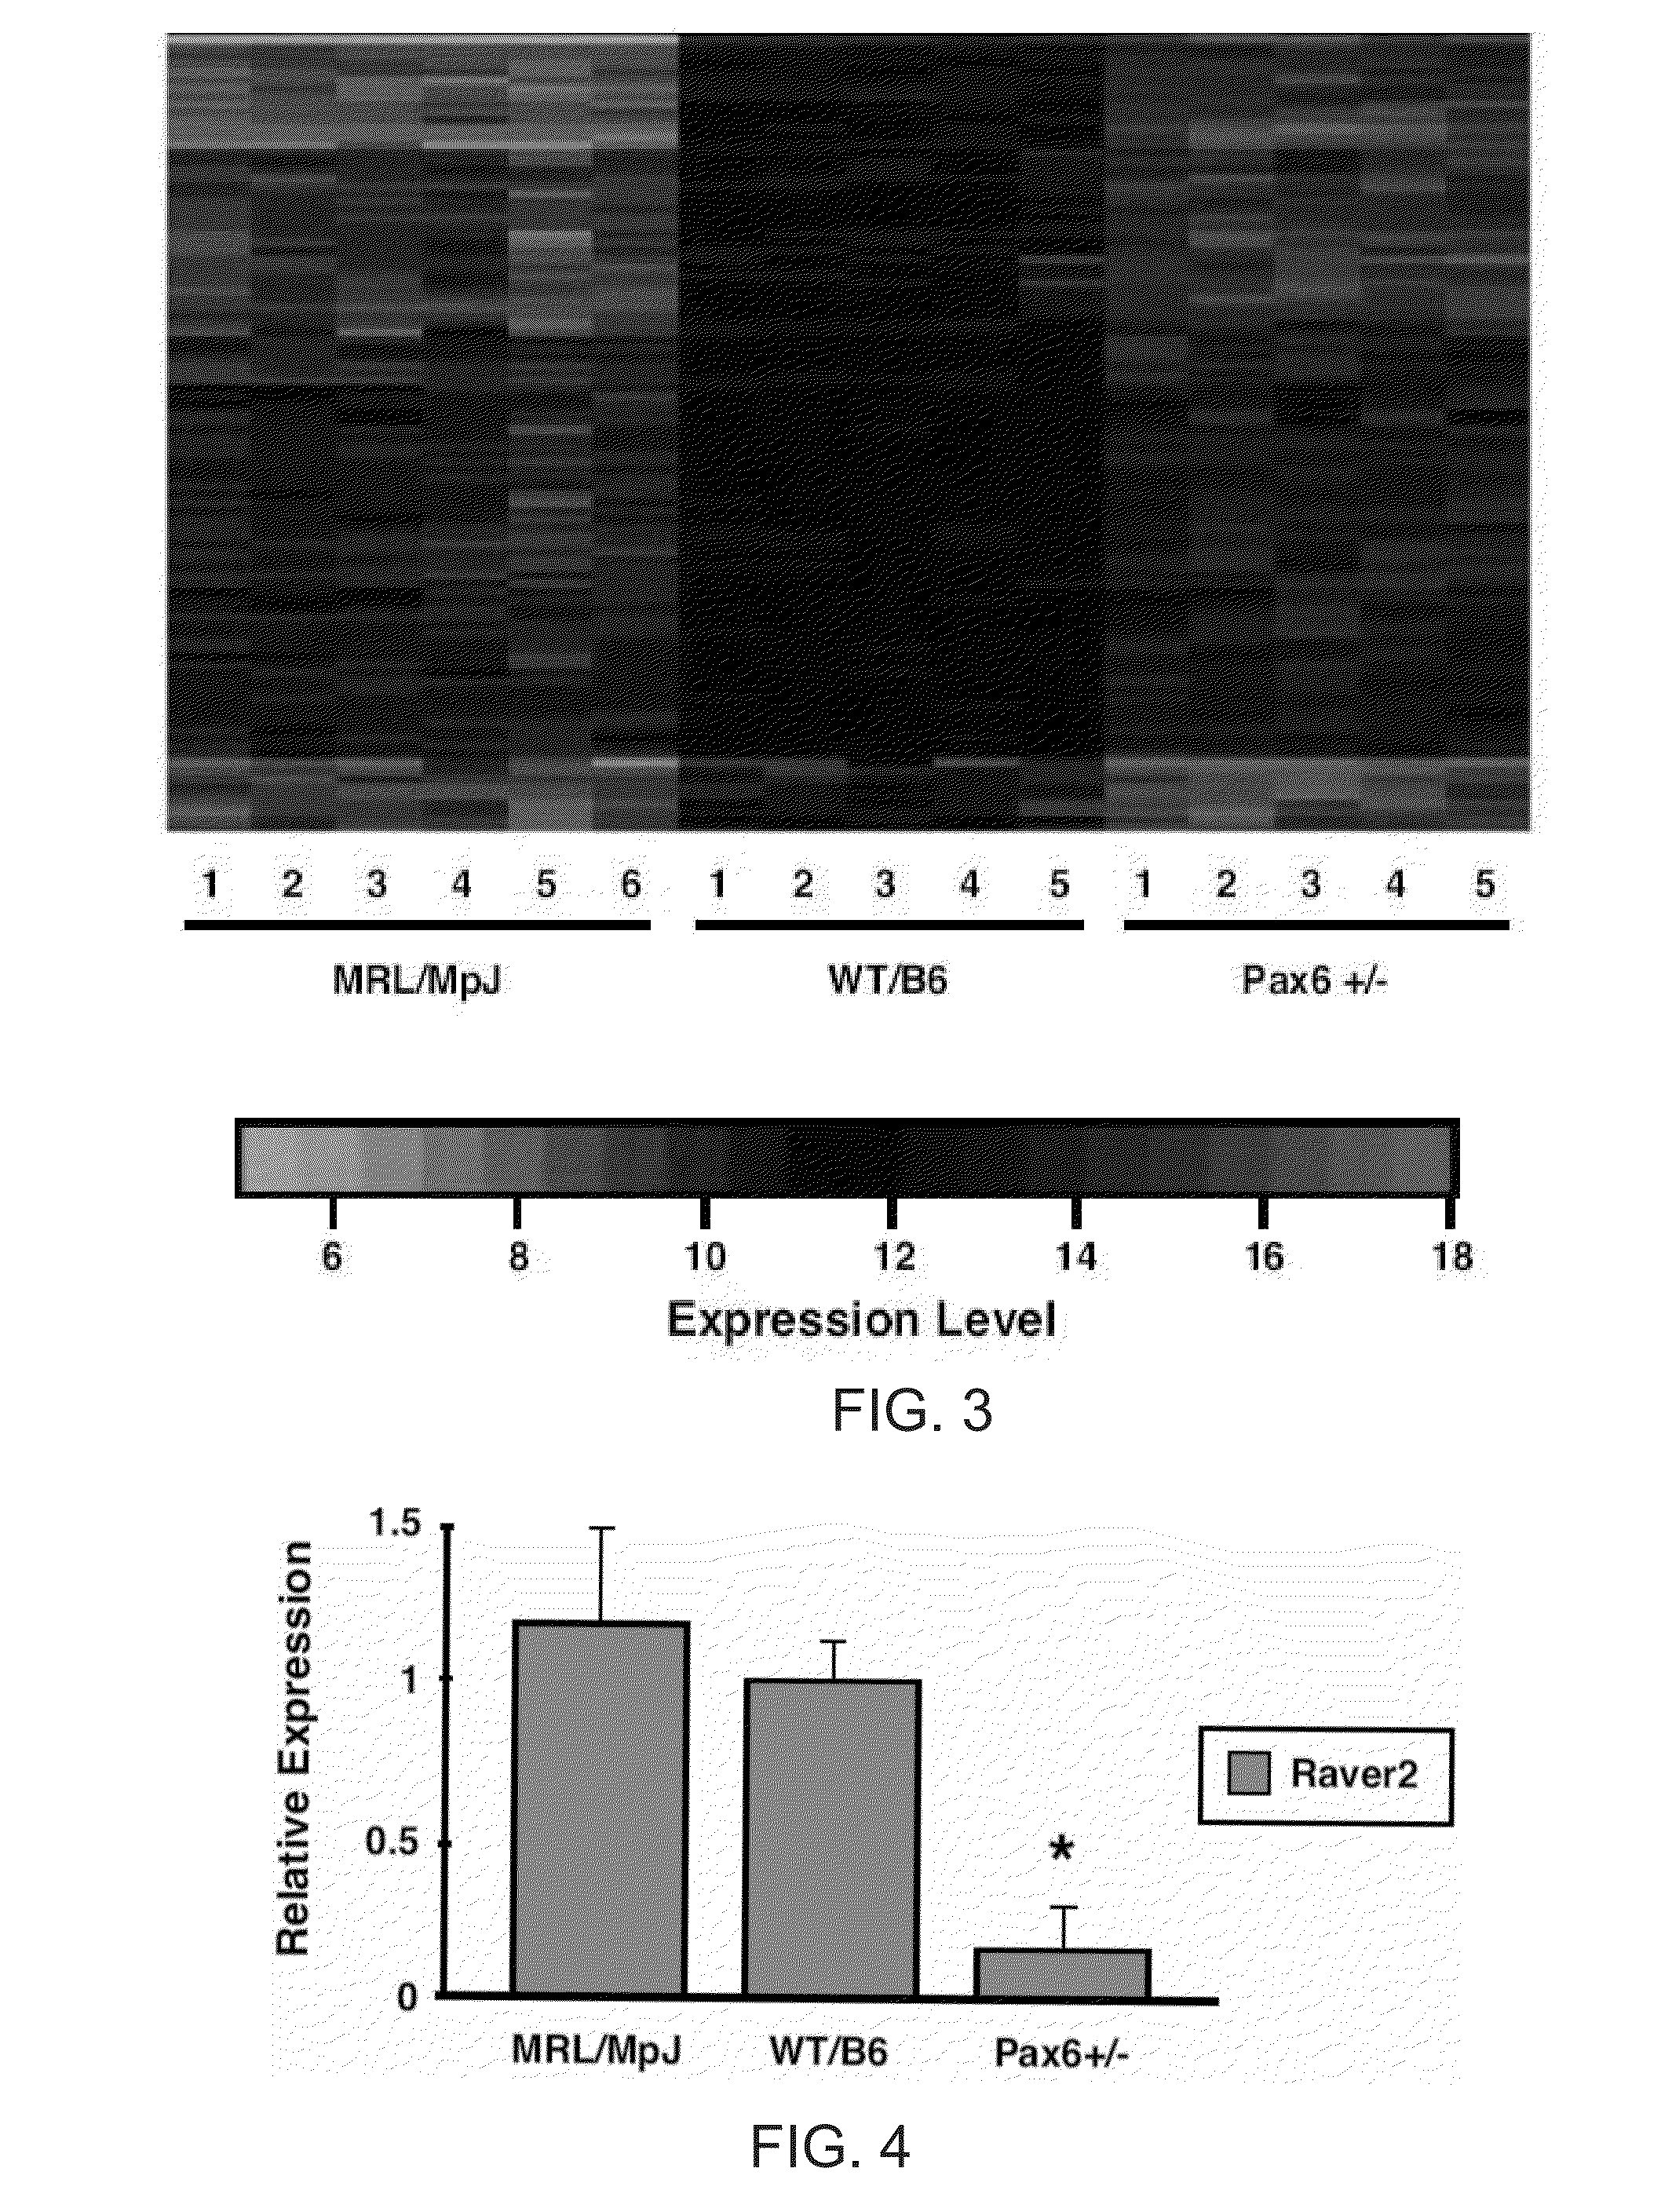 Methods of controlling vascularity using raver2 as a mediator for expression of VEGF receptor sfit1